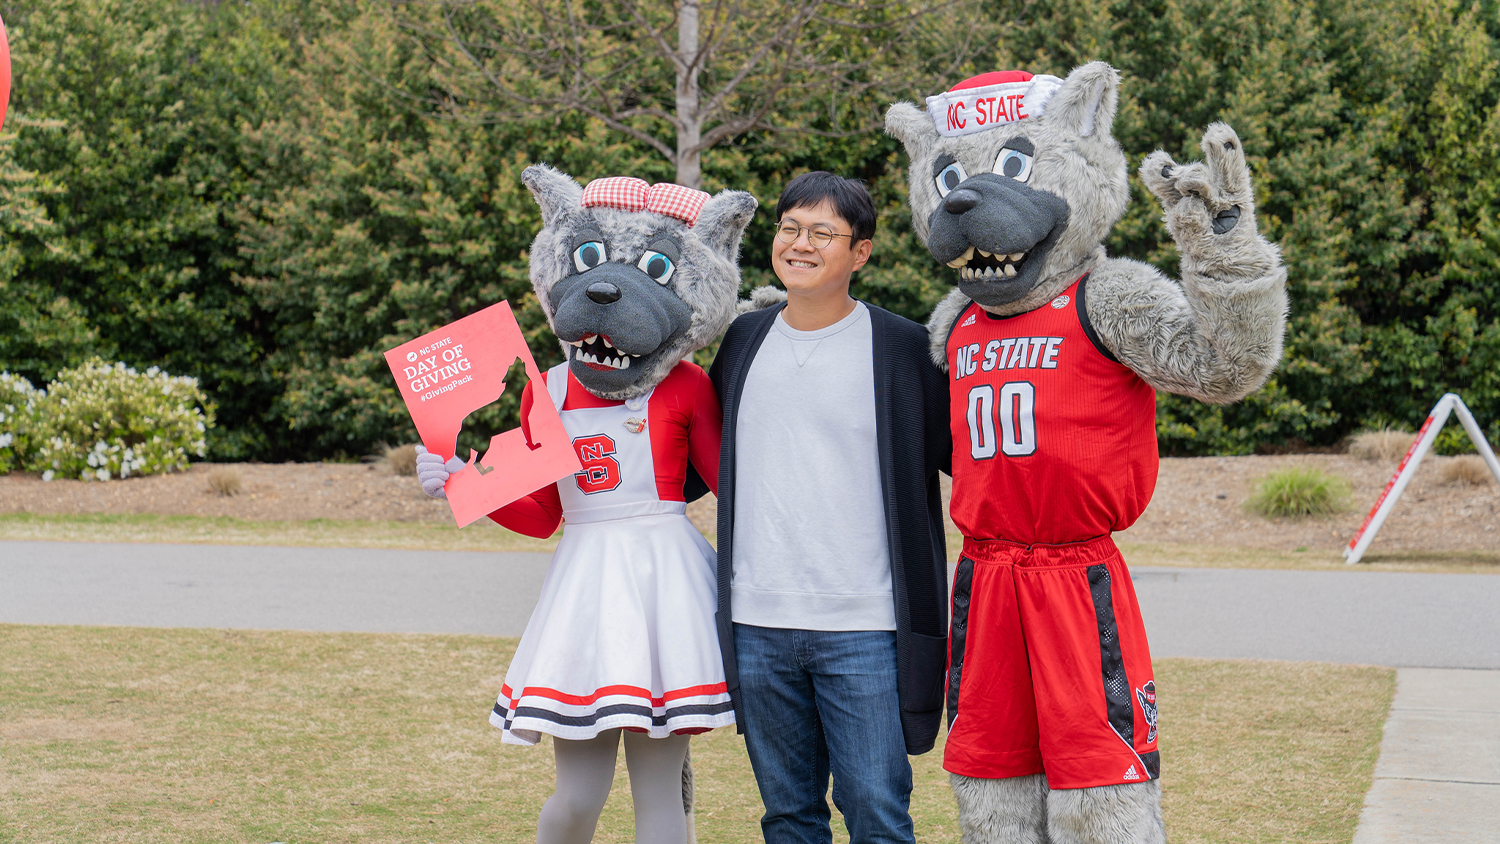 Mr and Ms. Wuf pose with a student on Stafford Commons while holding Day of Giving signs